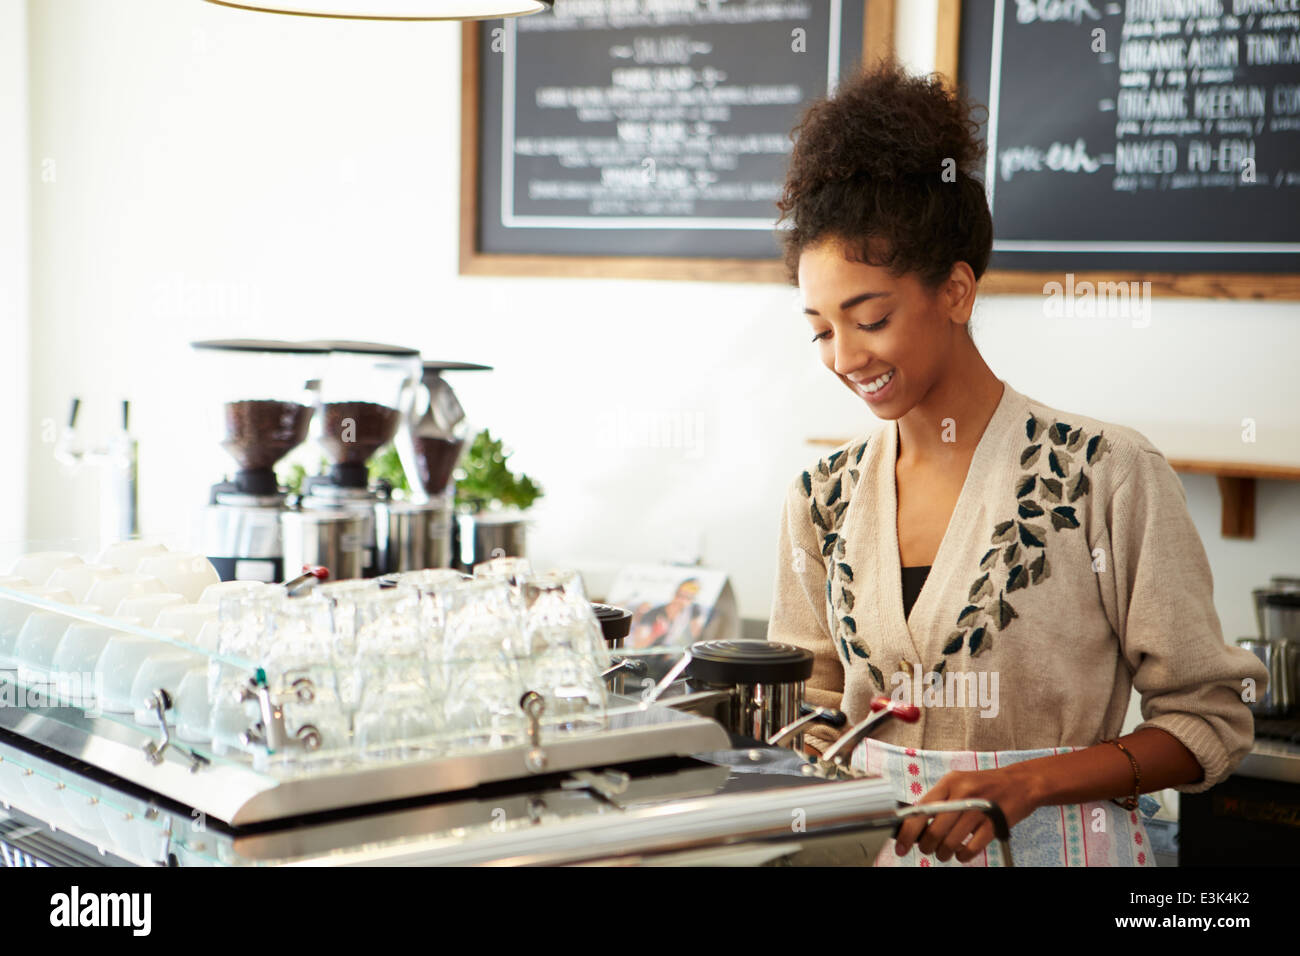 Female Owner Of Coffee Shop Stock Photo